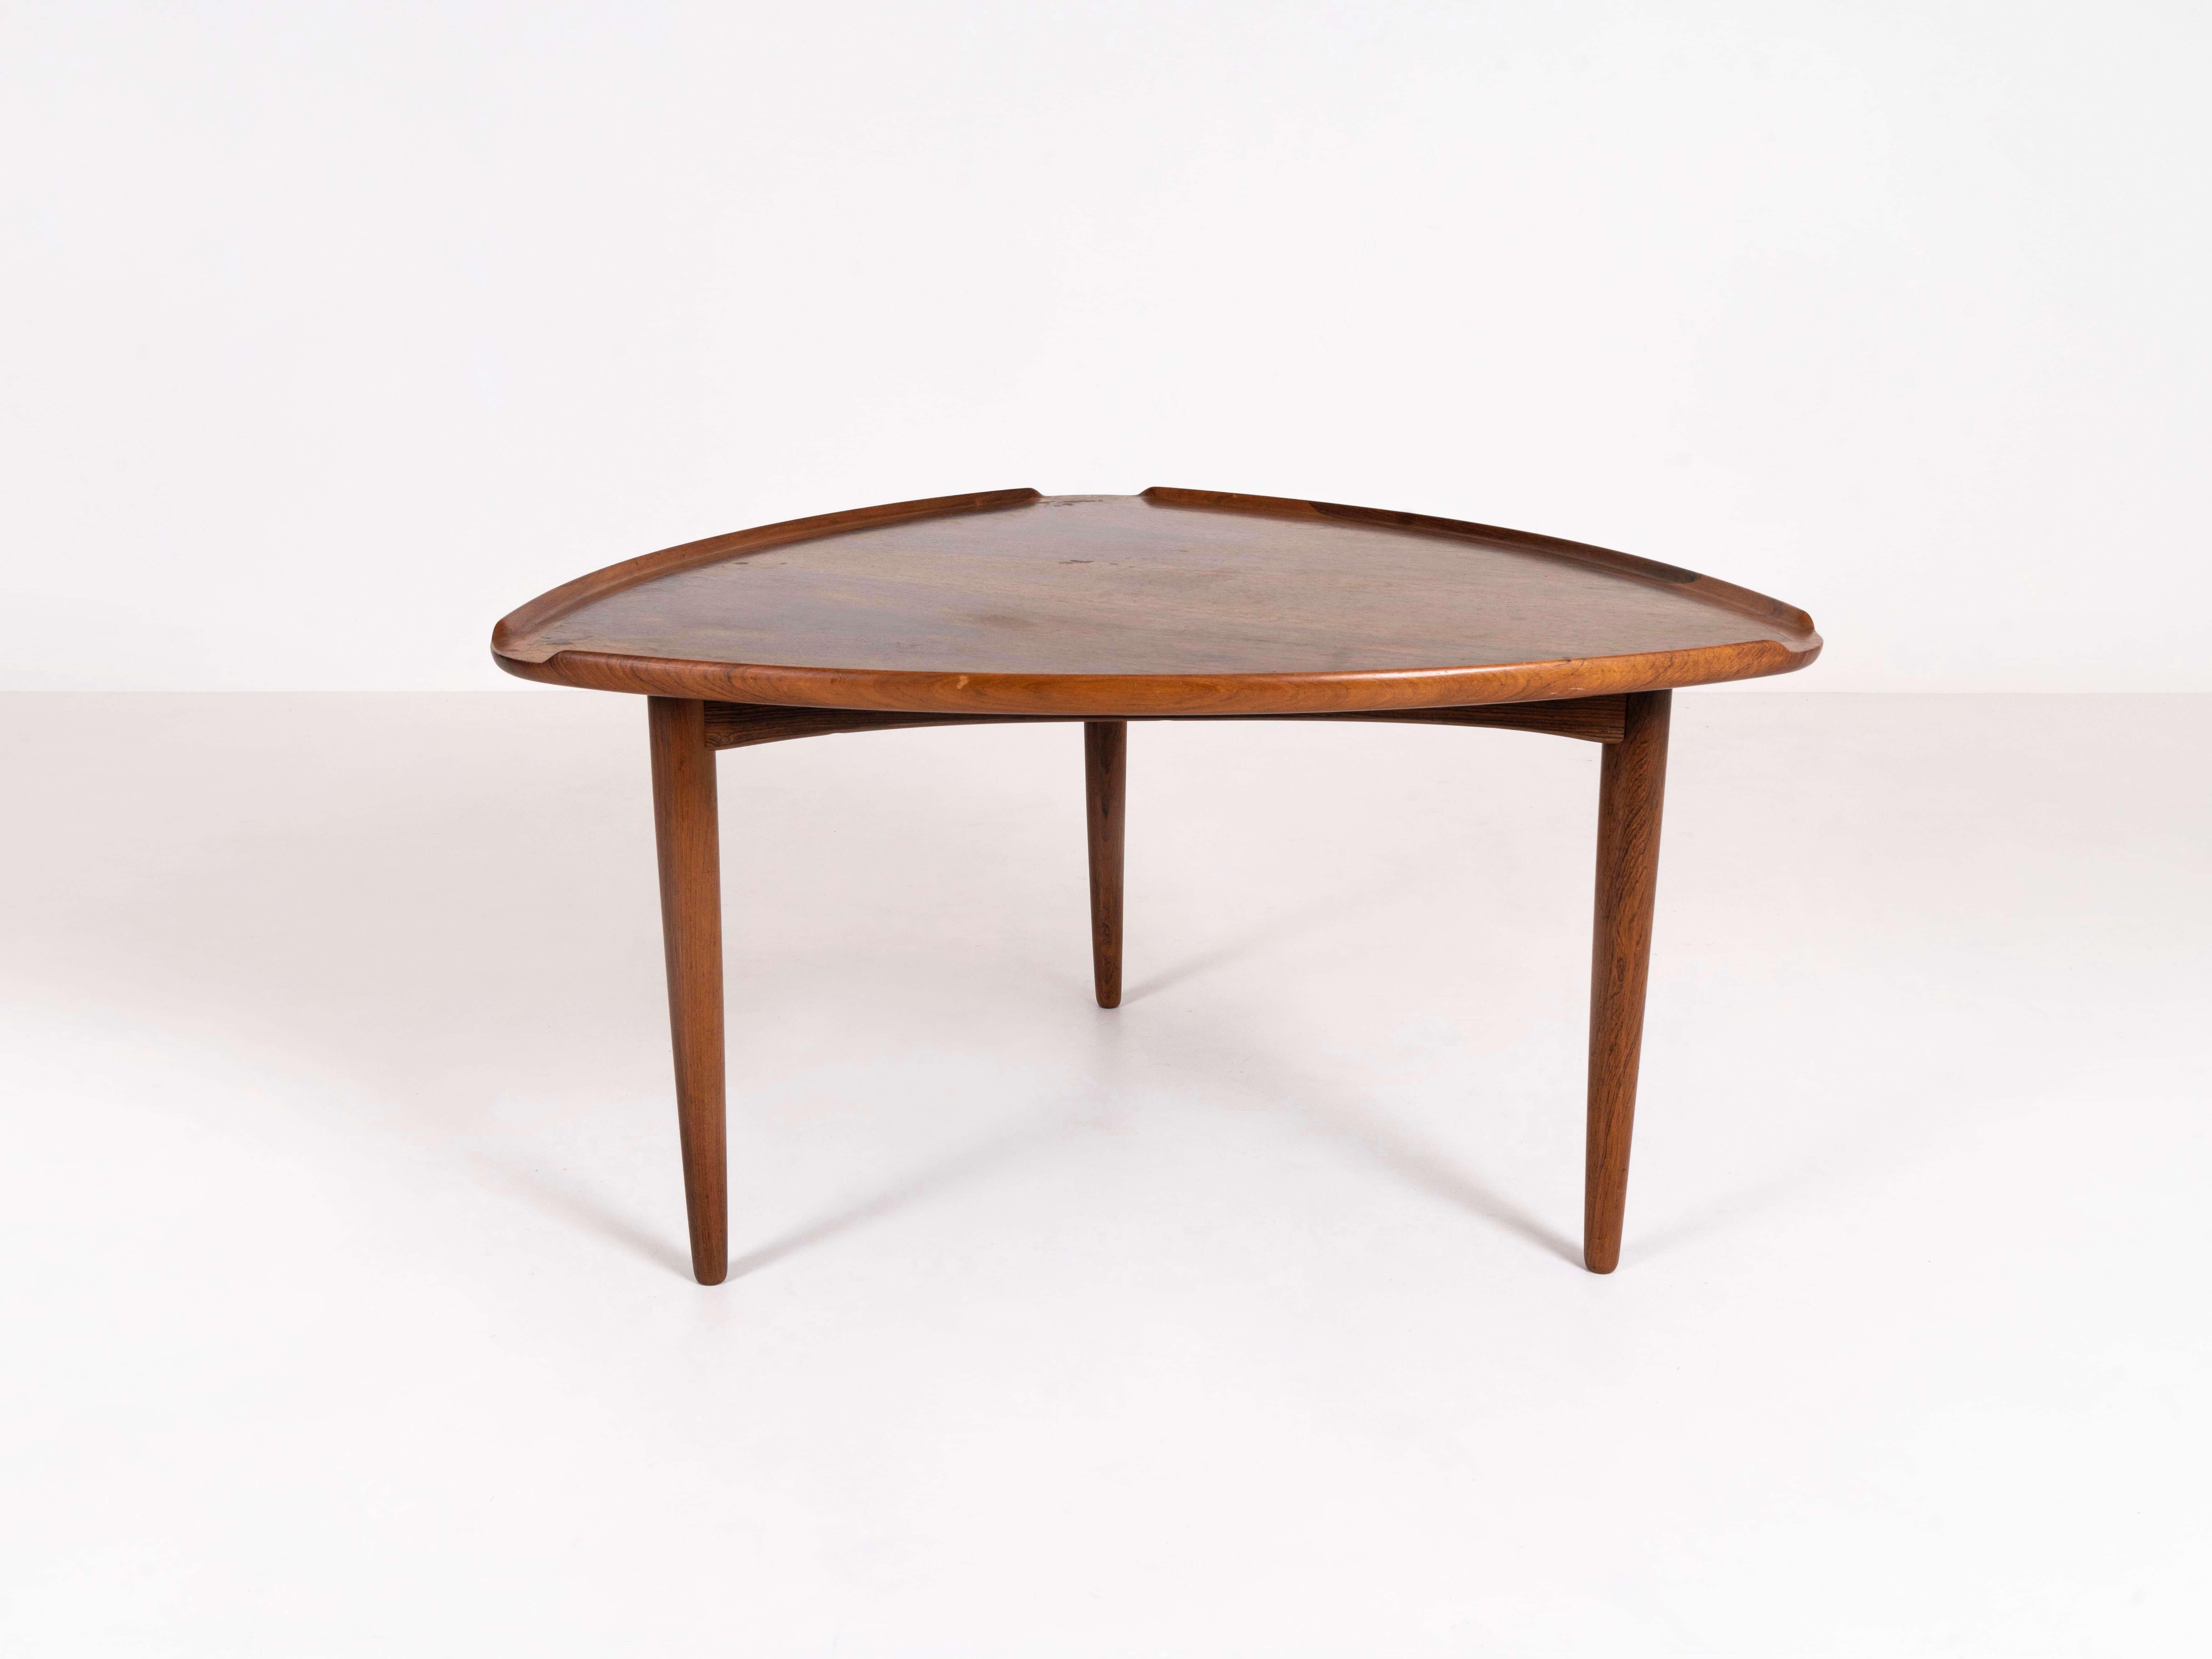 Triangular coffee table in rosewood designed by Arne Vodder for Silkeborg. This vintage coffee table from Denmark in the 1950s, has an interesting shape with profiled edges on the sides. It has three cone-shaped legs. It is in good condition with